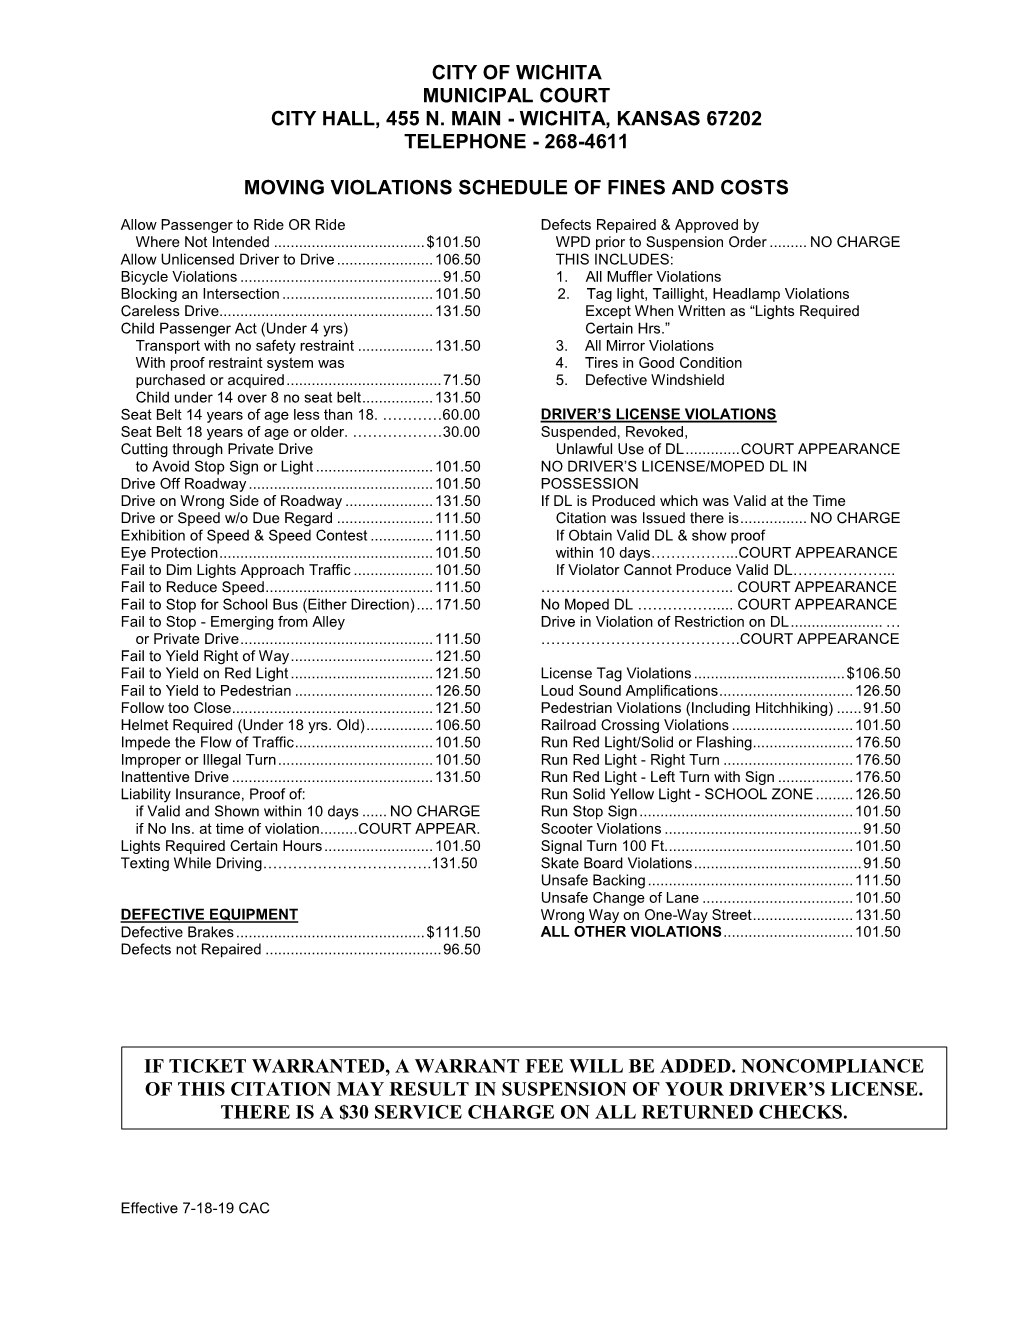 268-4611 Moving Violations Schedule of Fines and Costs